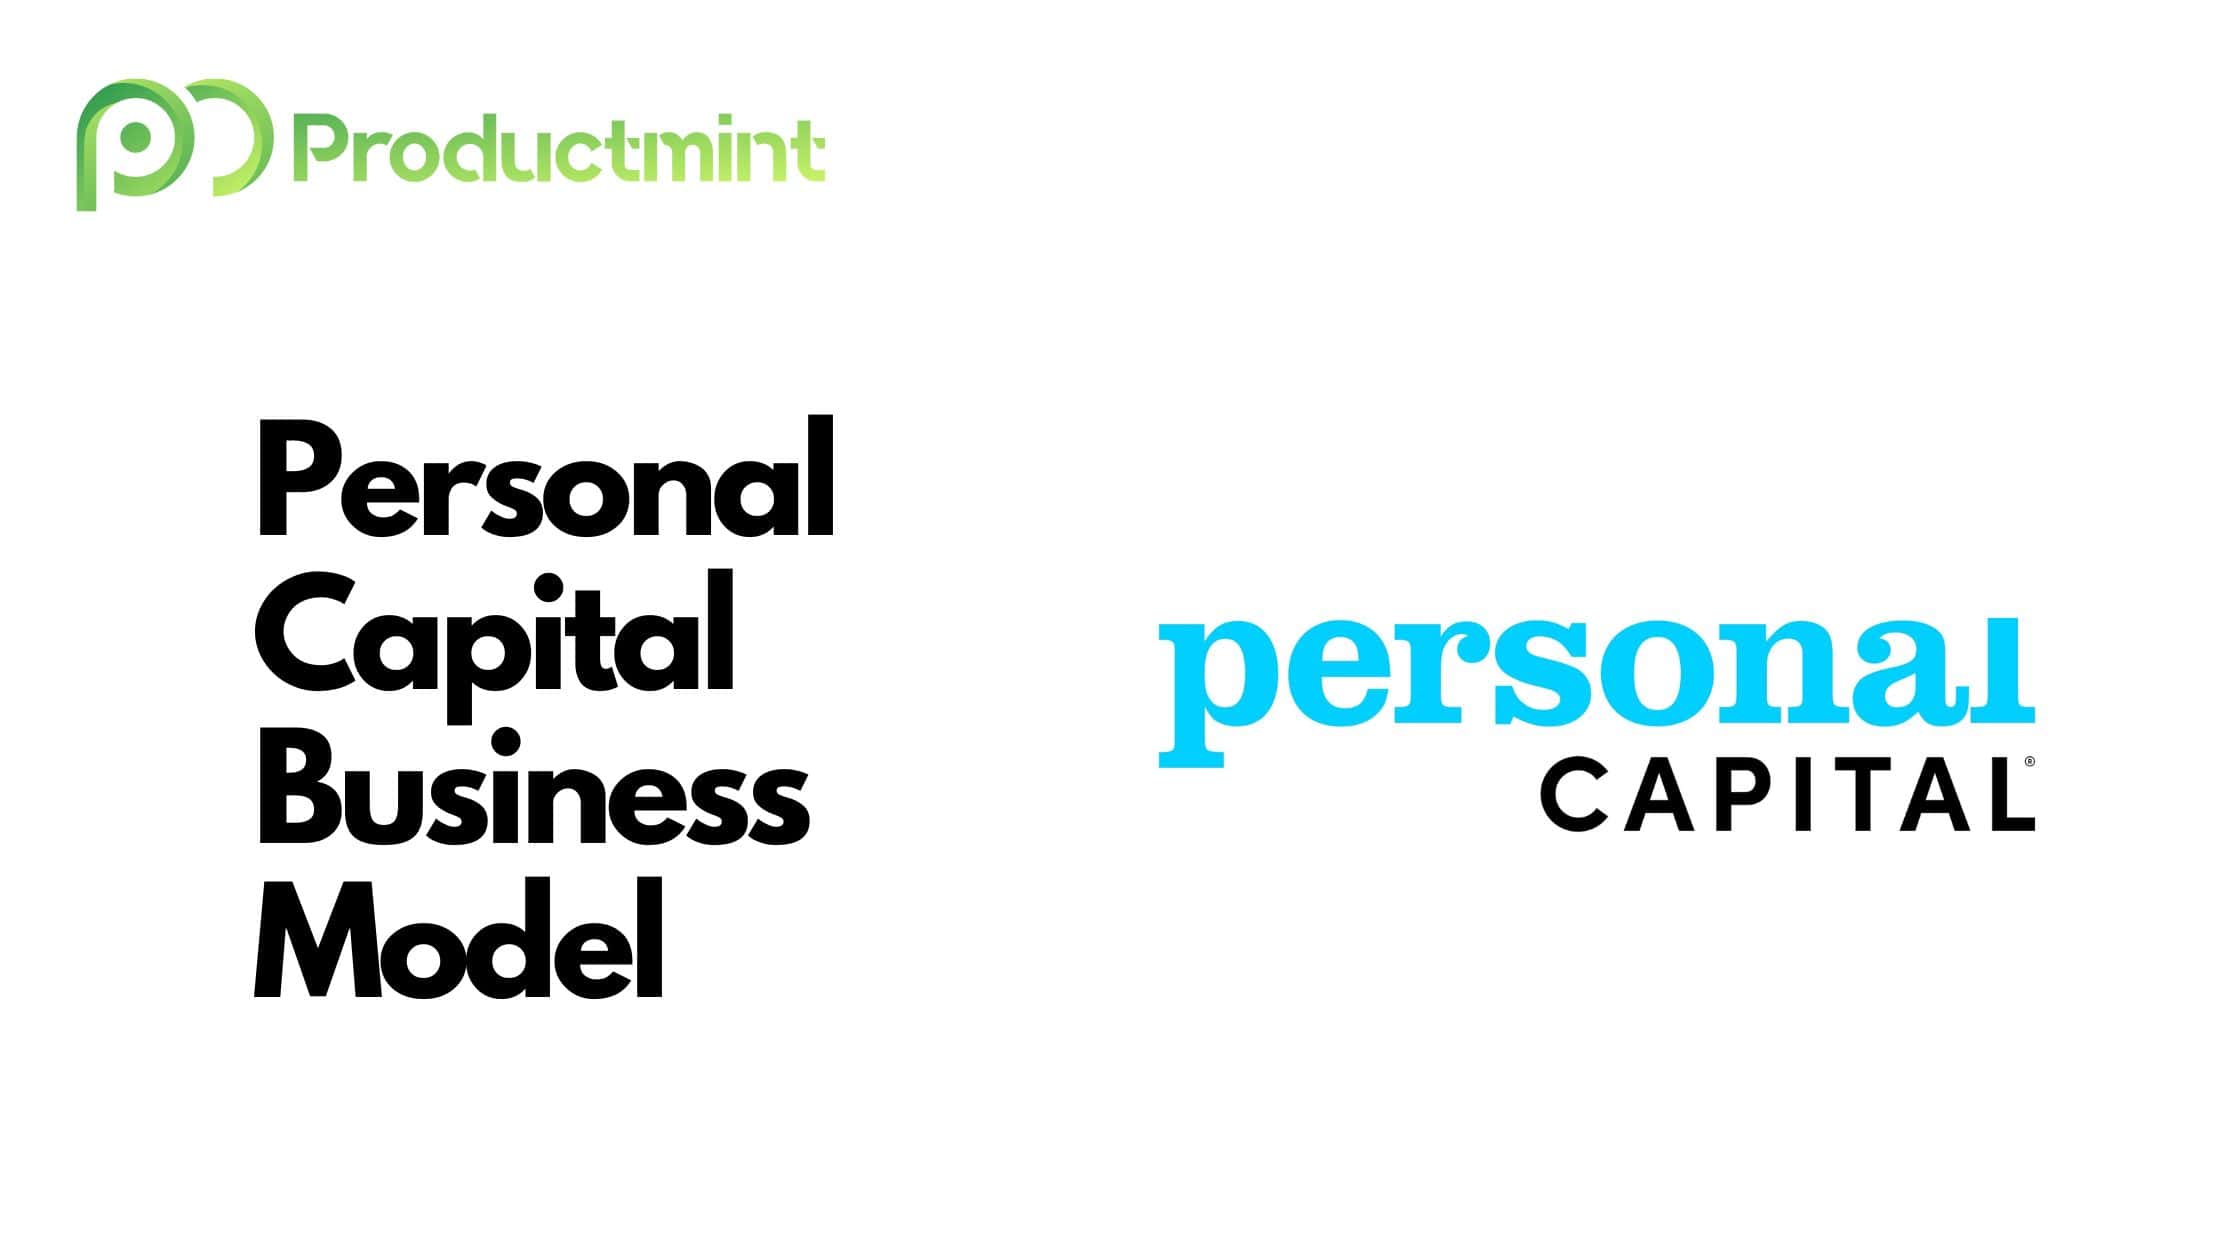 Personal Capital Business Model